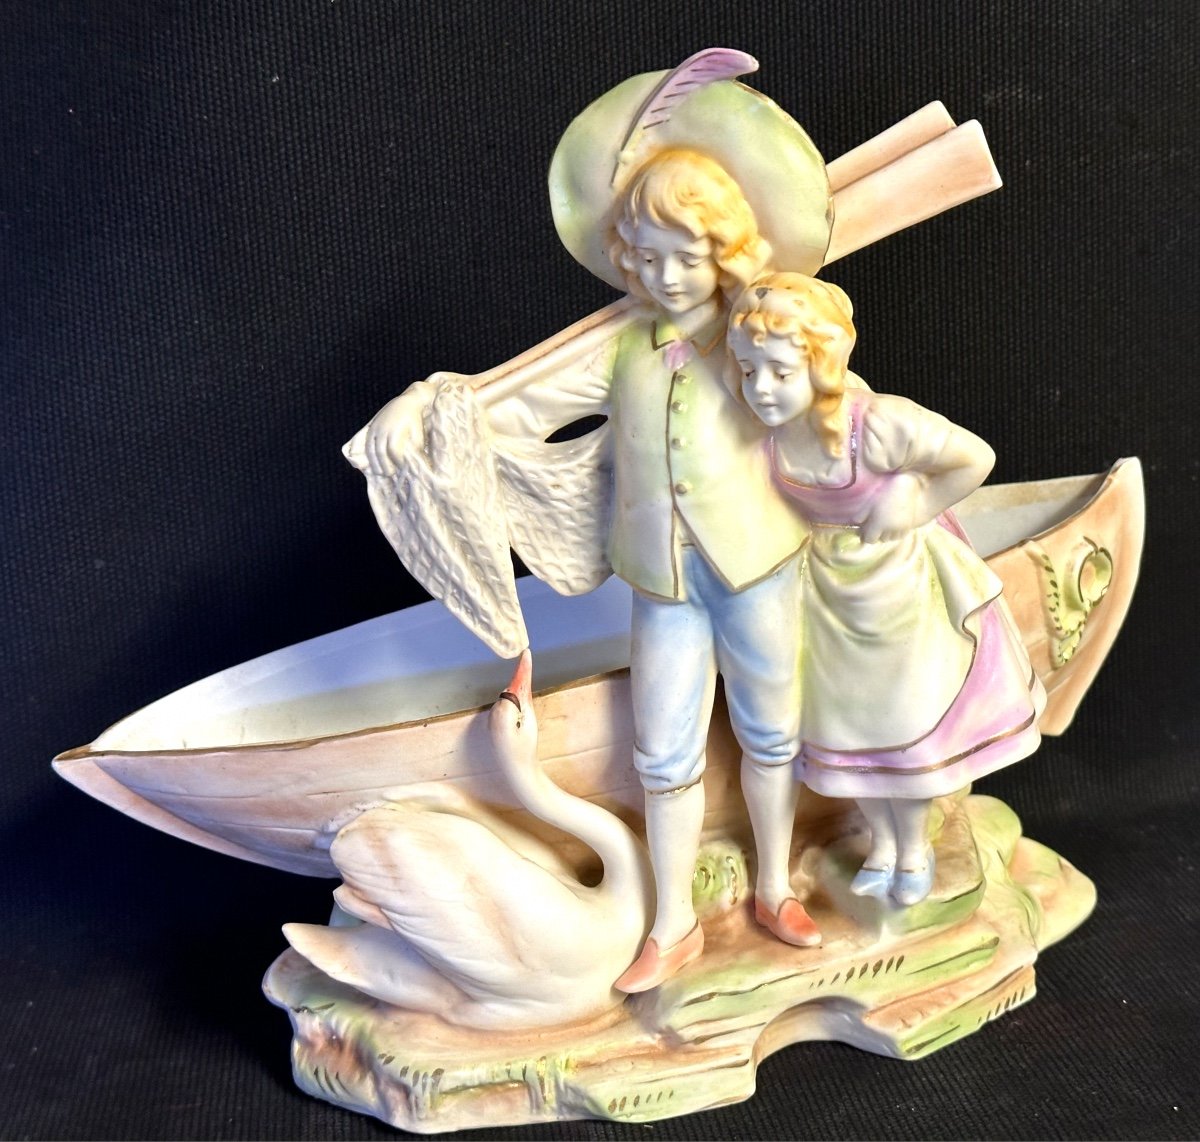 Children In The Boat And Swan Large Empty Pocket Biscuit Planter Late 19th Century Romantic Boat /6